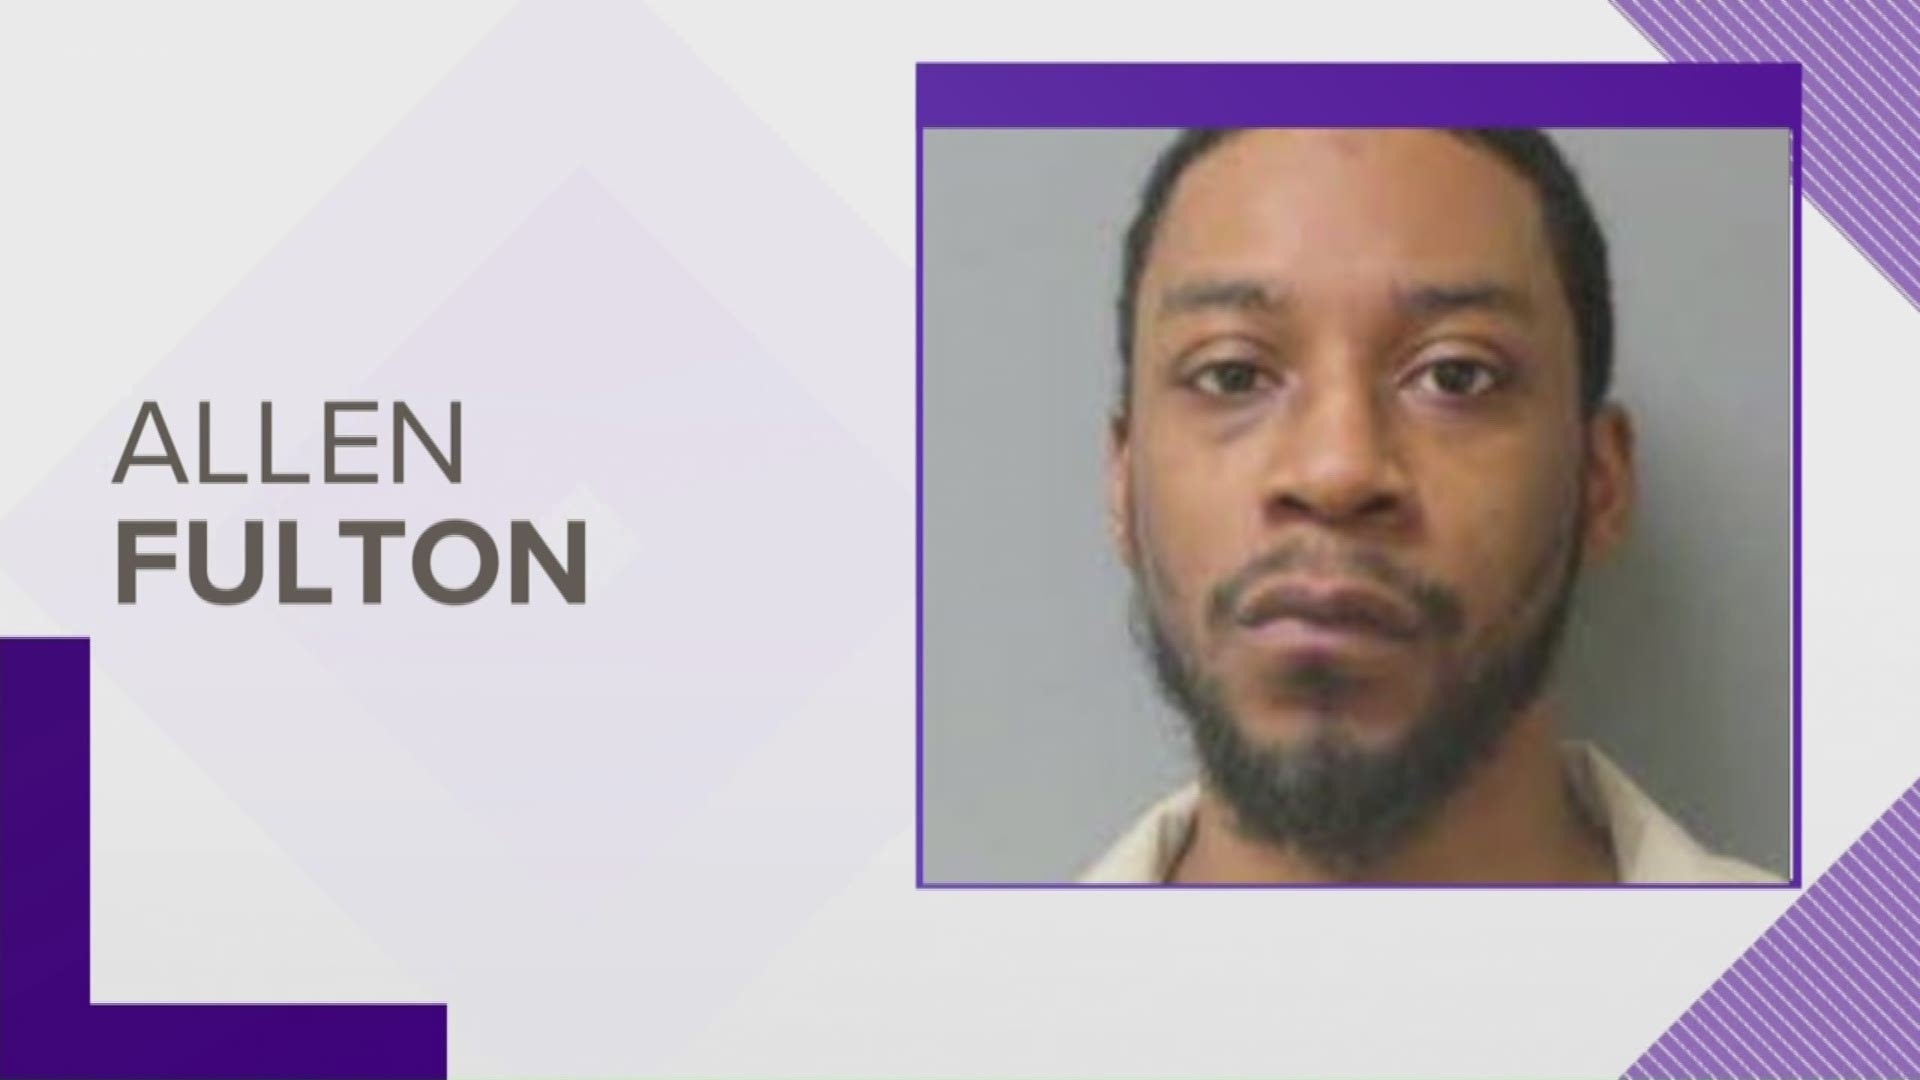 He's been identified as Allen Fulton, 31 and he was found dead in his cell at Ridgeland Correctional institution.